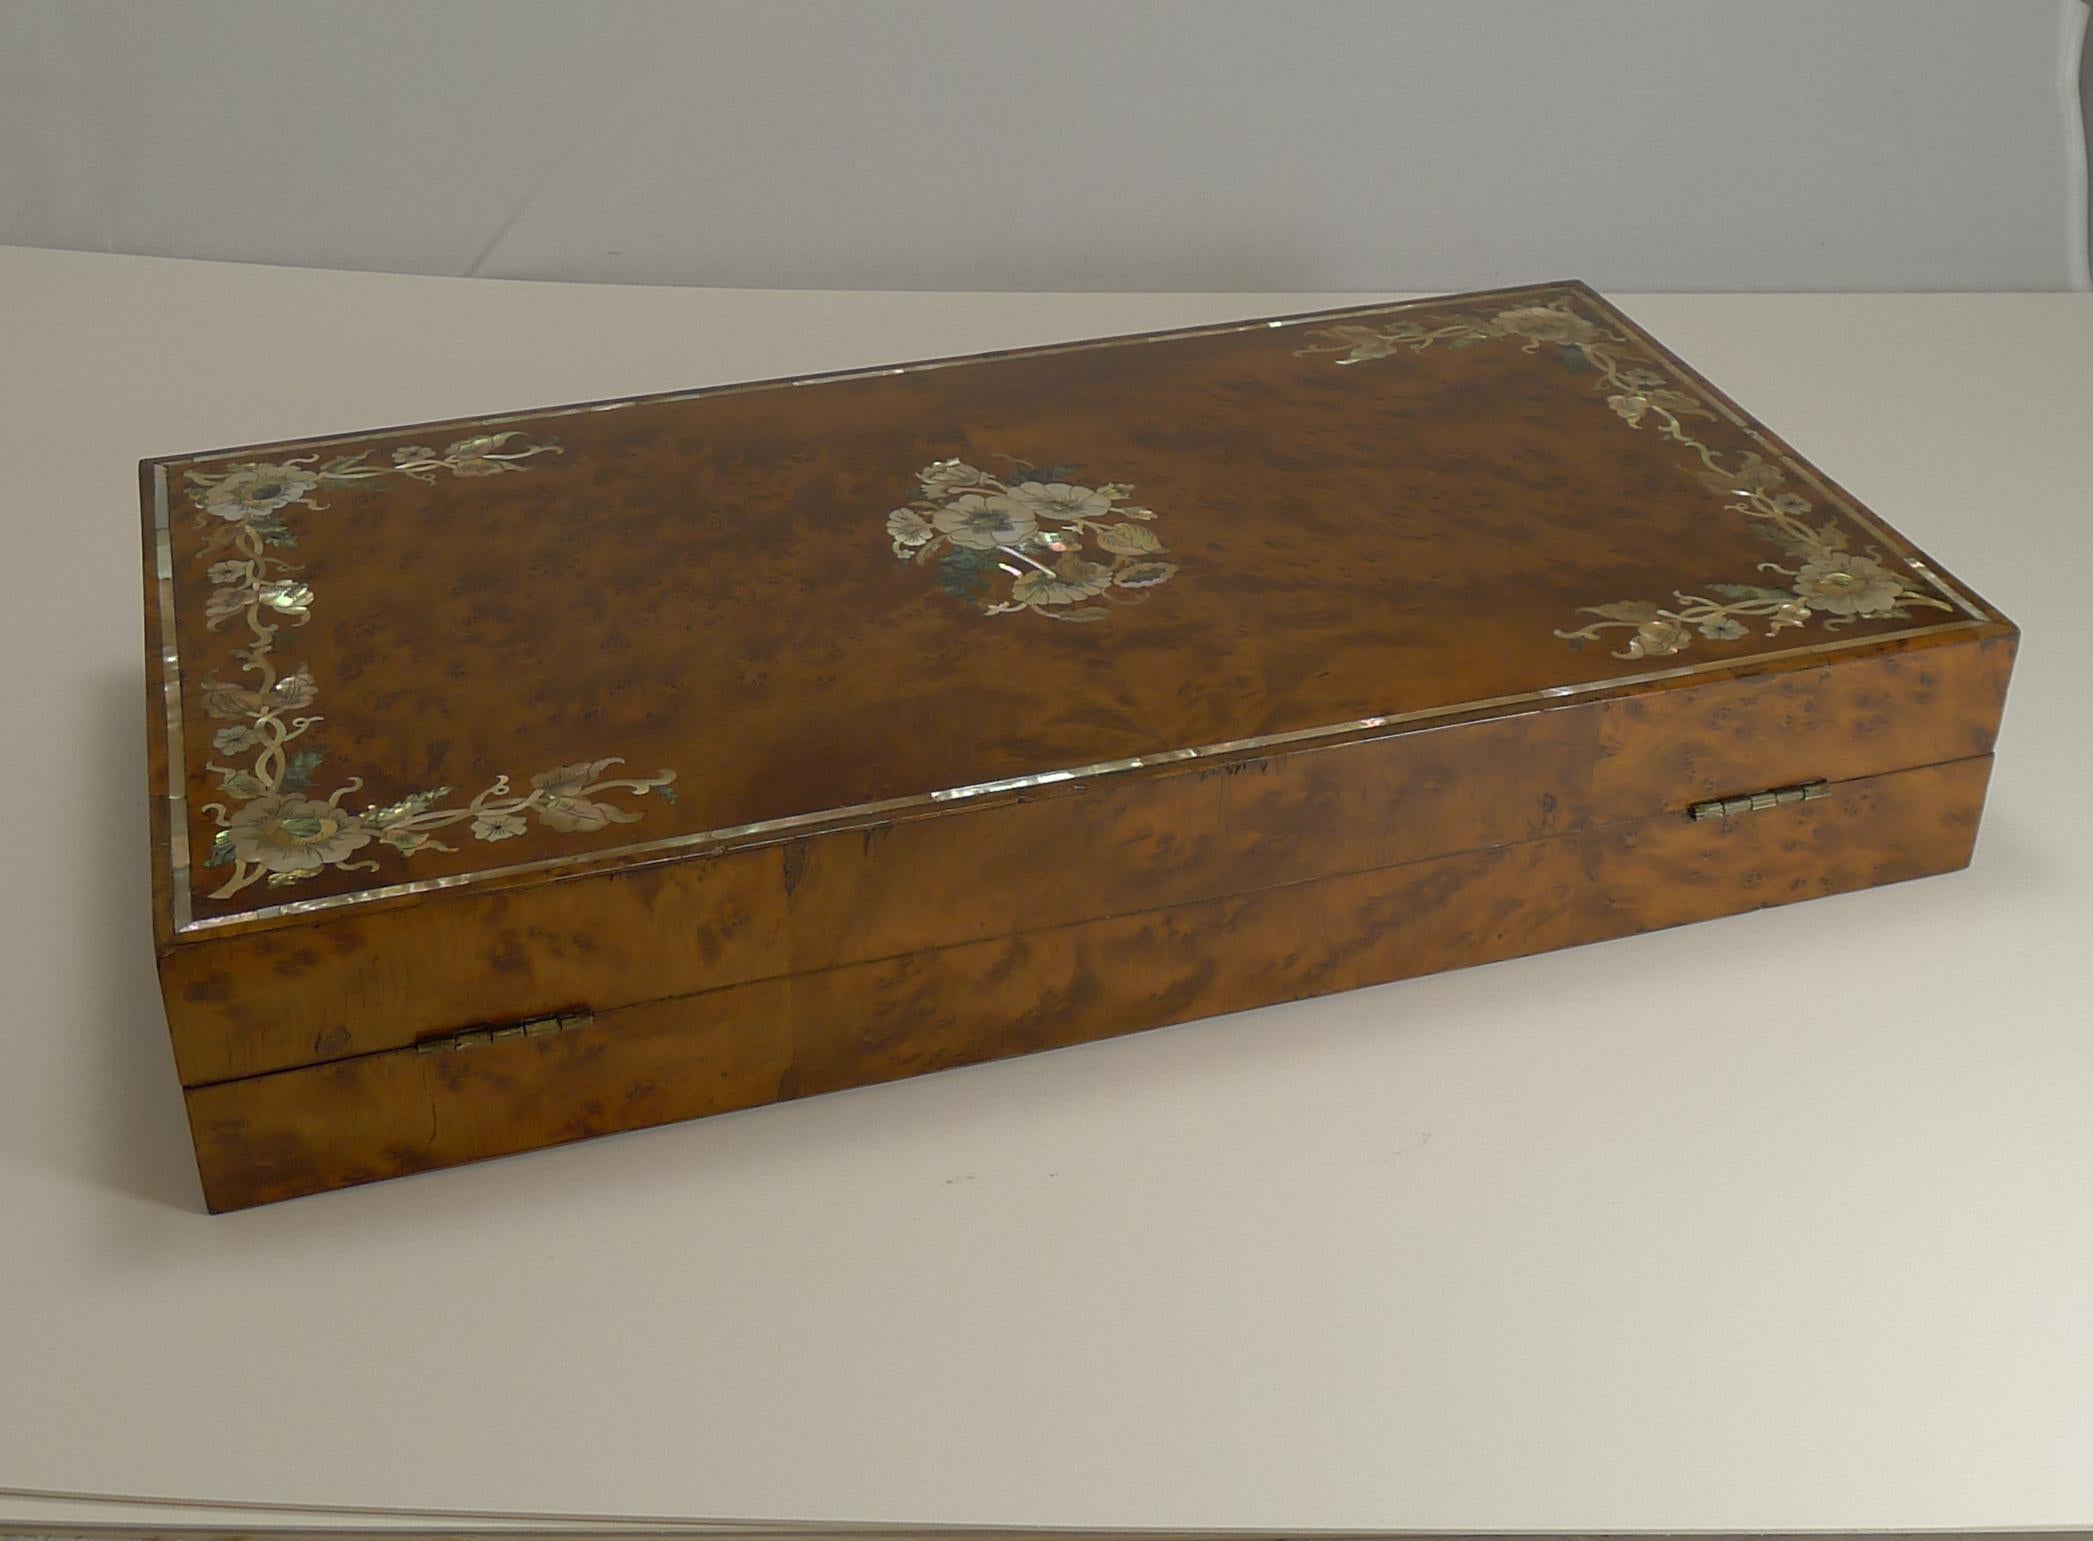 Late 19th Century Exquisite English Mother of Pearl Inlaid Amboyna Backgammon Board, circa 1890